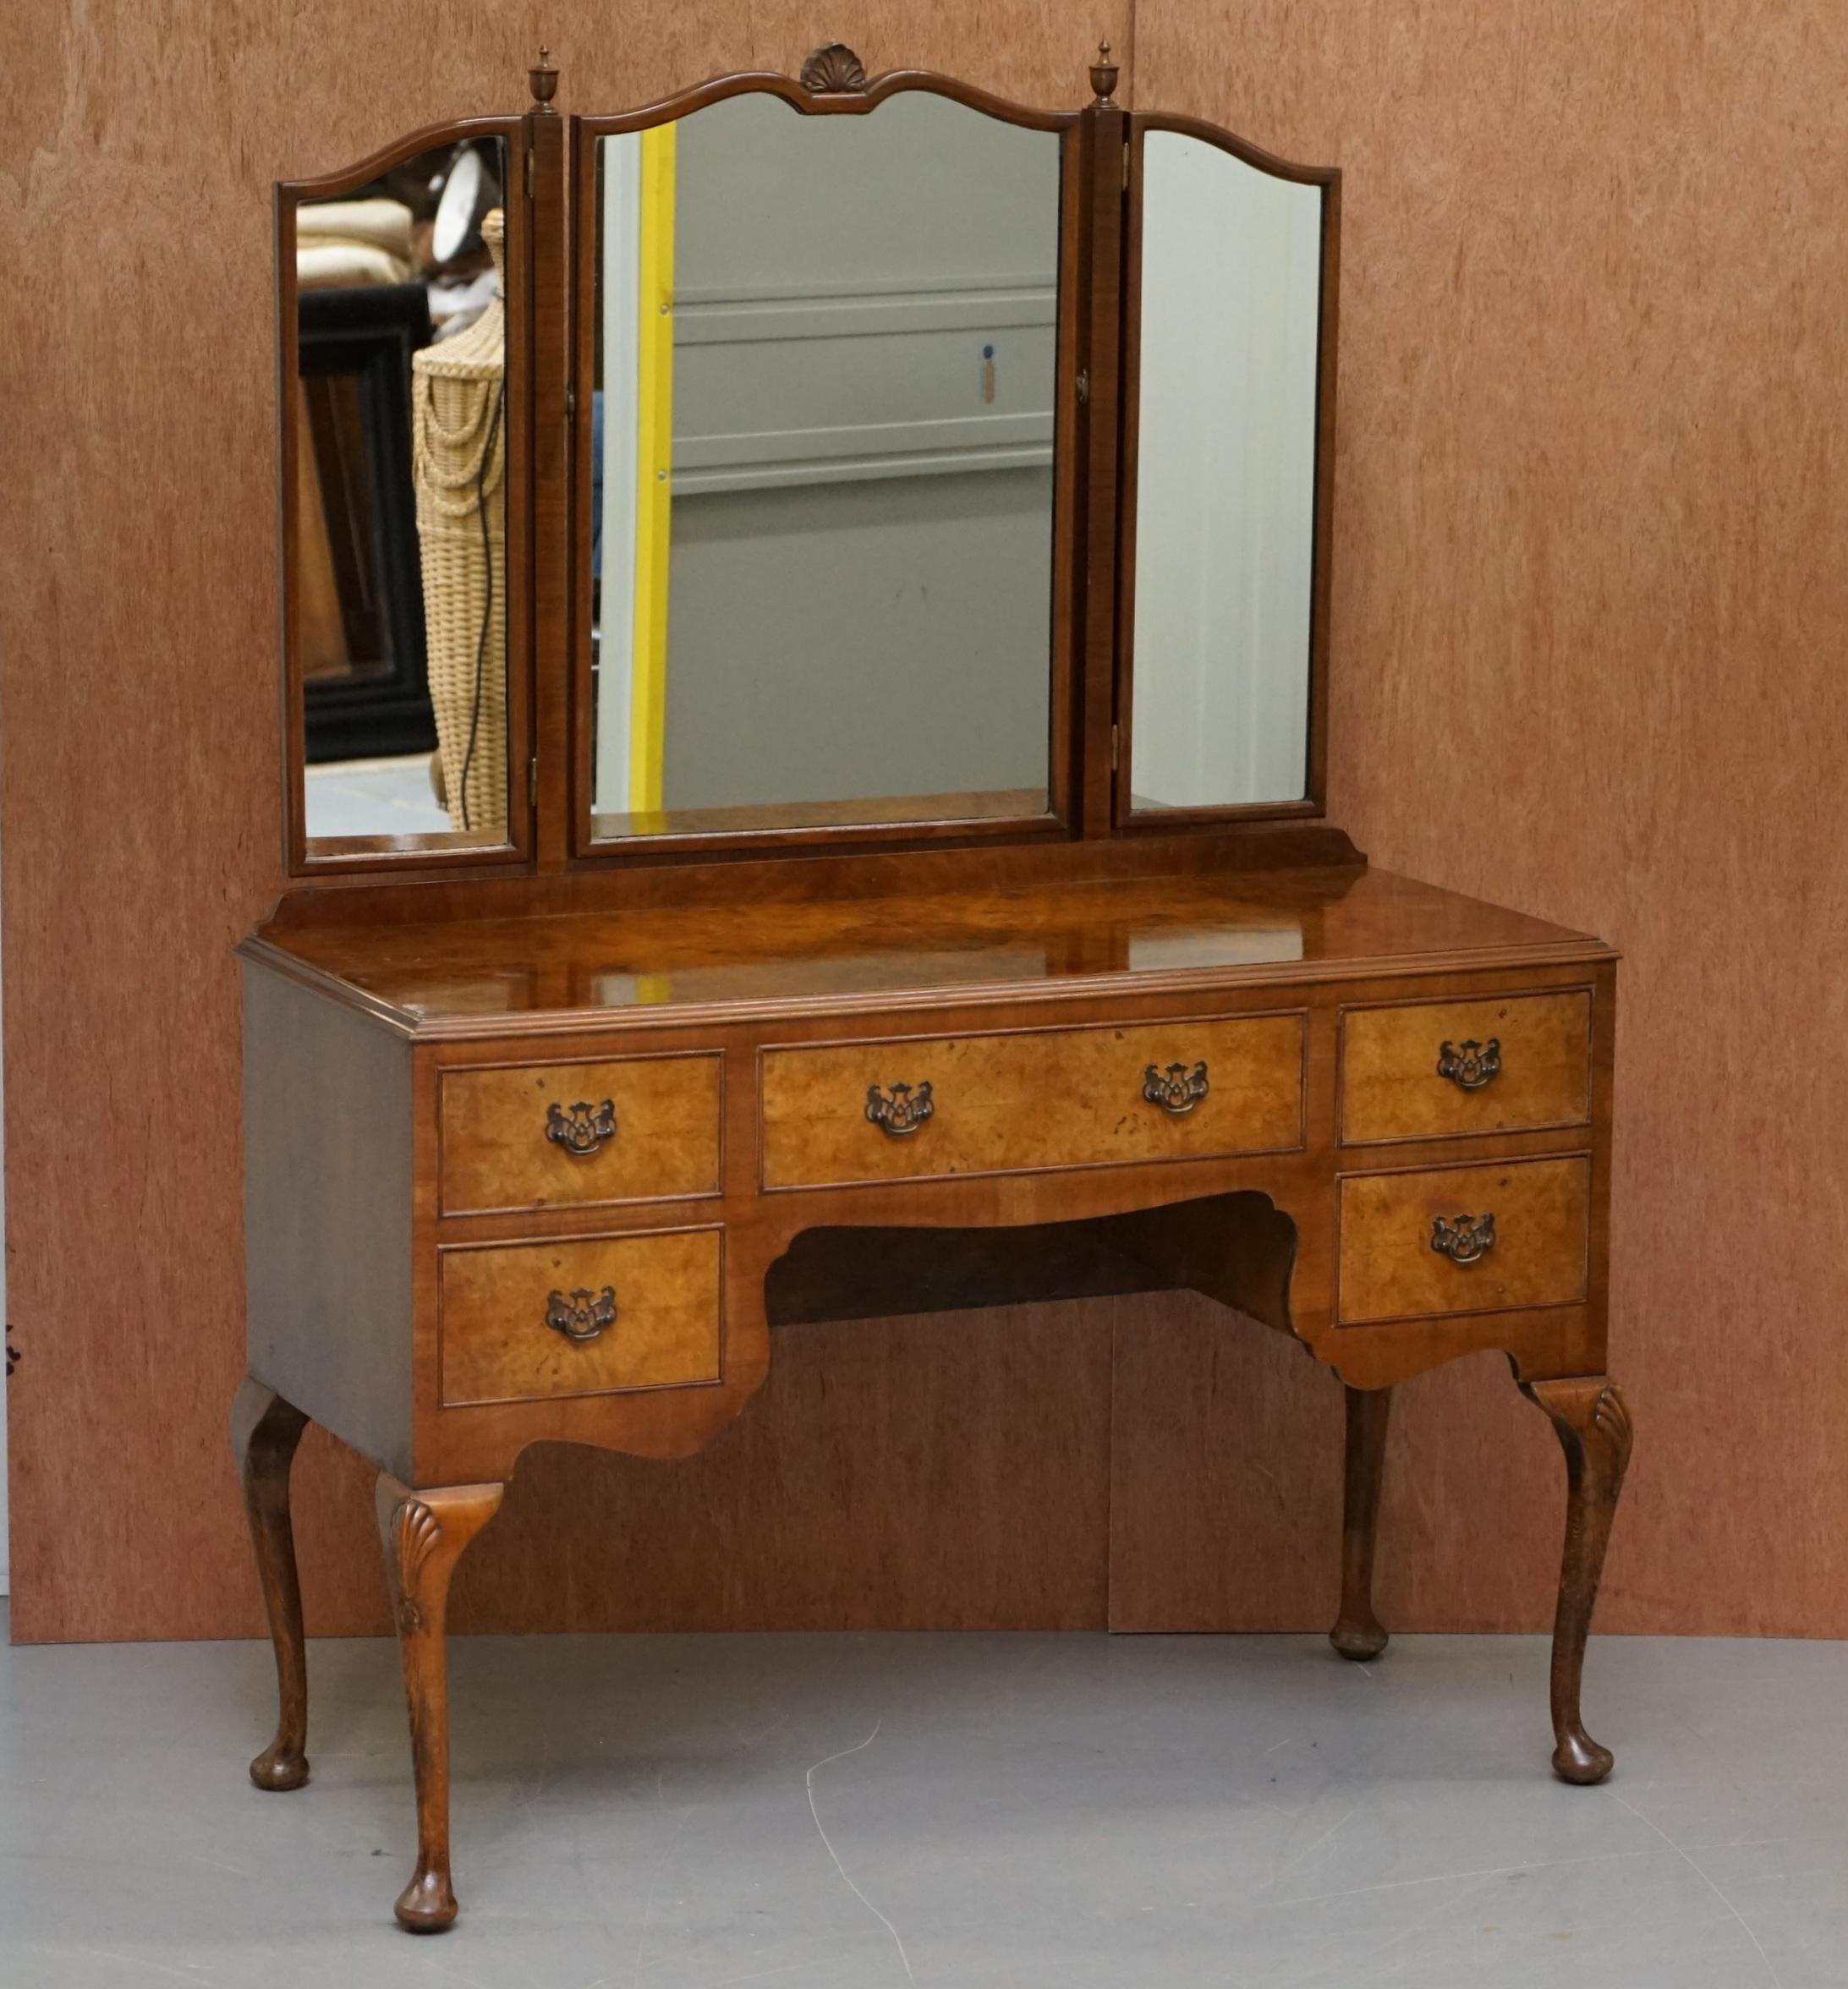 We are delighted to offer for sale this stunning circa 1930s Figured Walnut dressing table and stool with Tri-folding mirrors

This dressing really is exquisite, the walnut simply glows in the right light, the tri-fold mirrors are easily